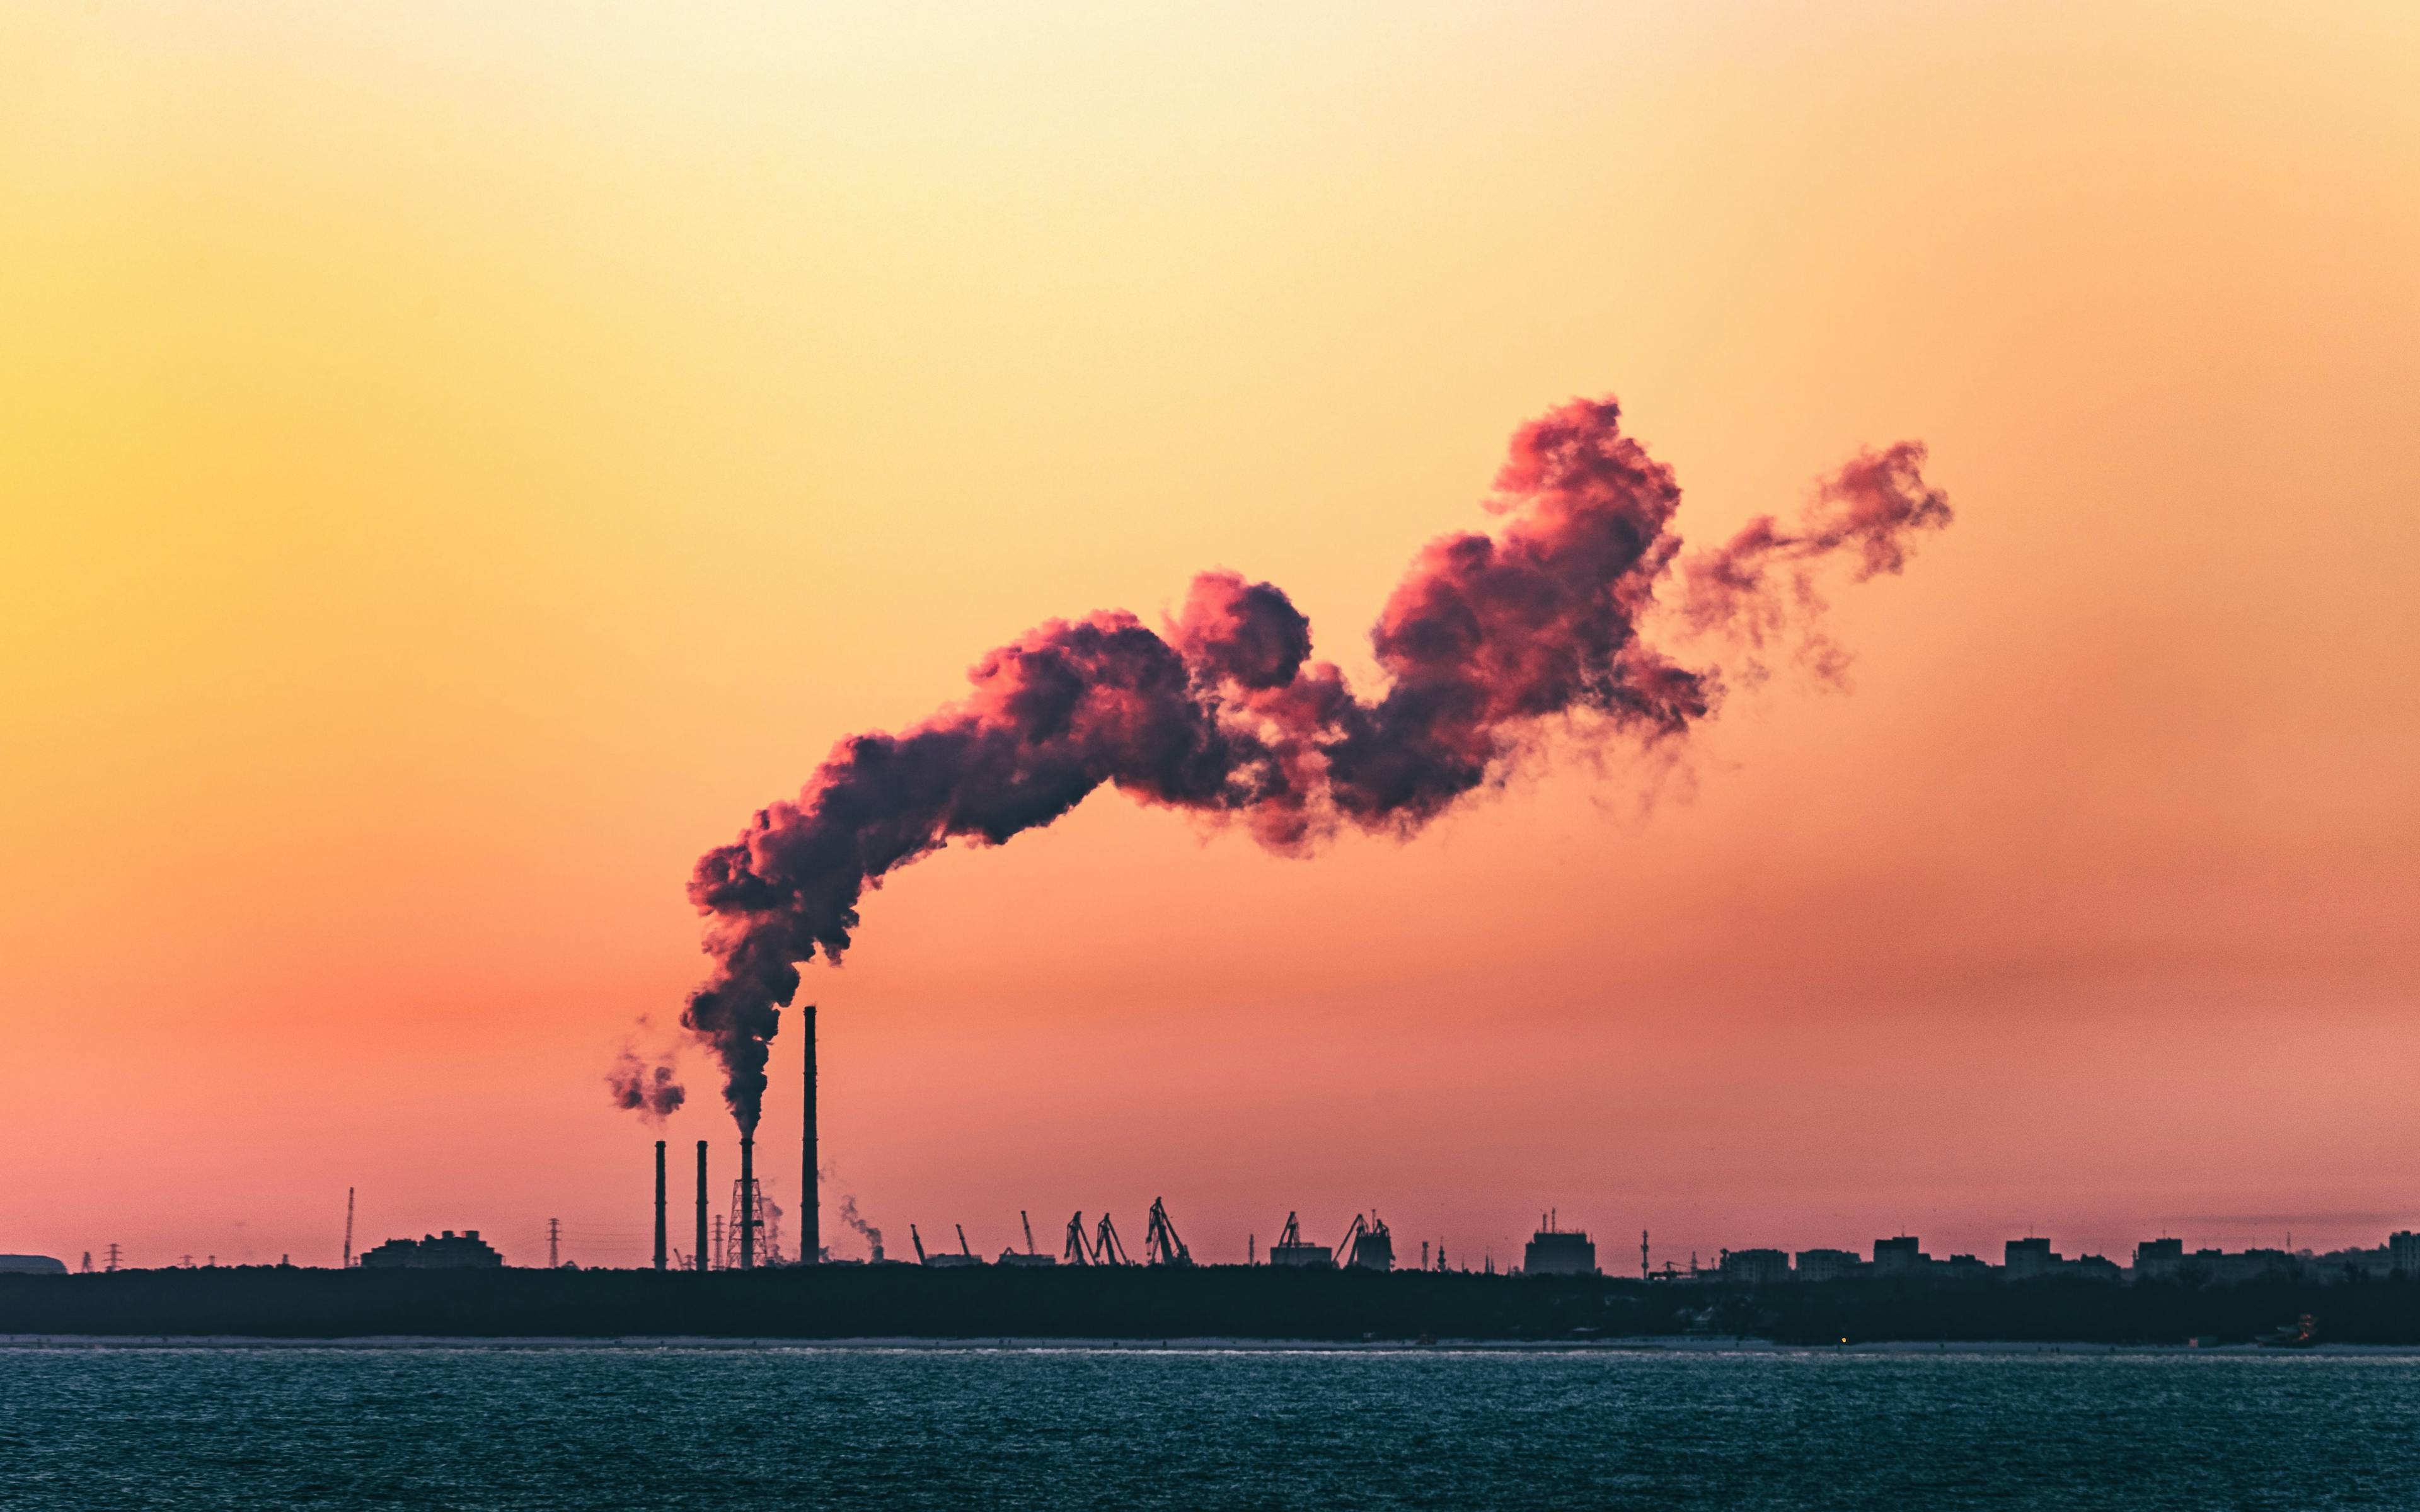 Adopt an internal carbon price to drive decarbonization